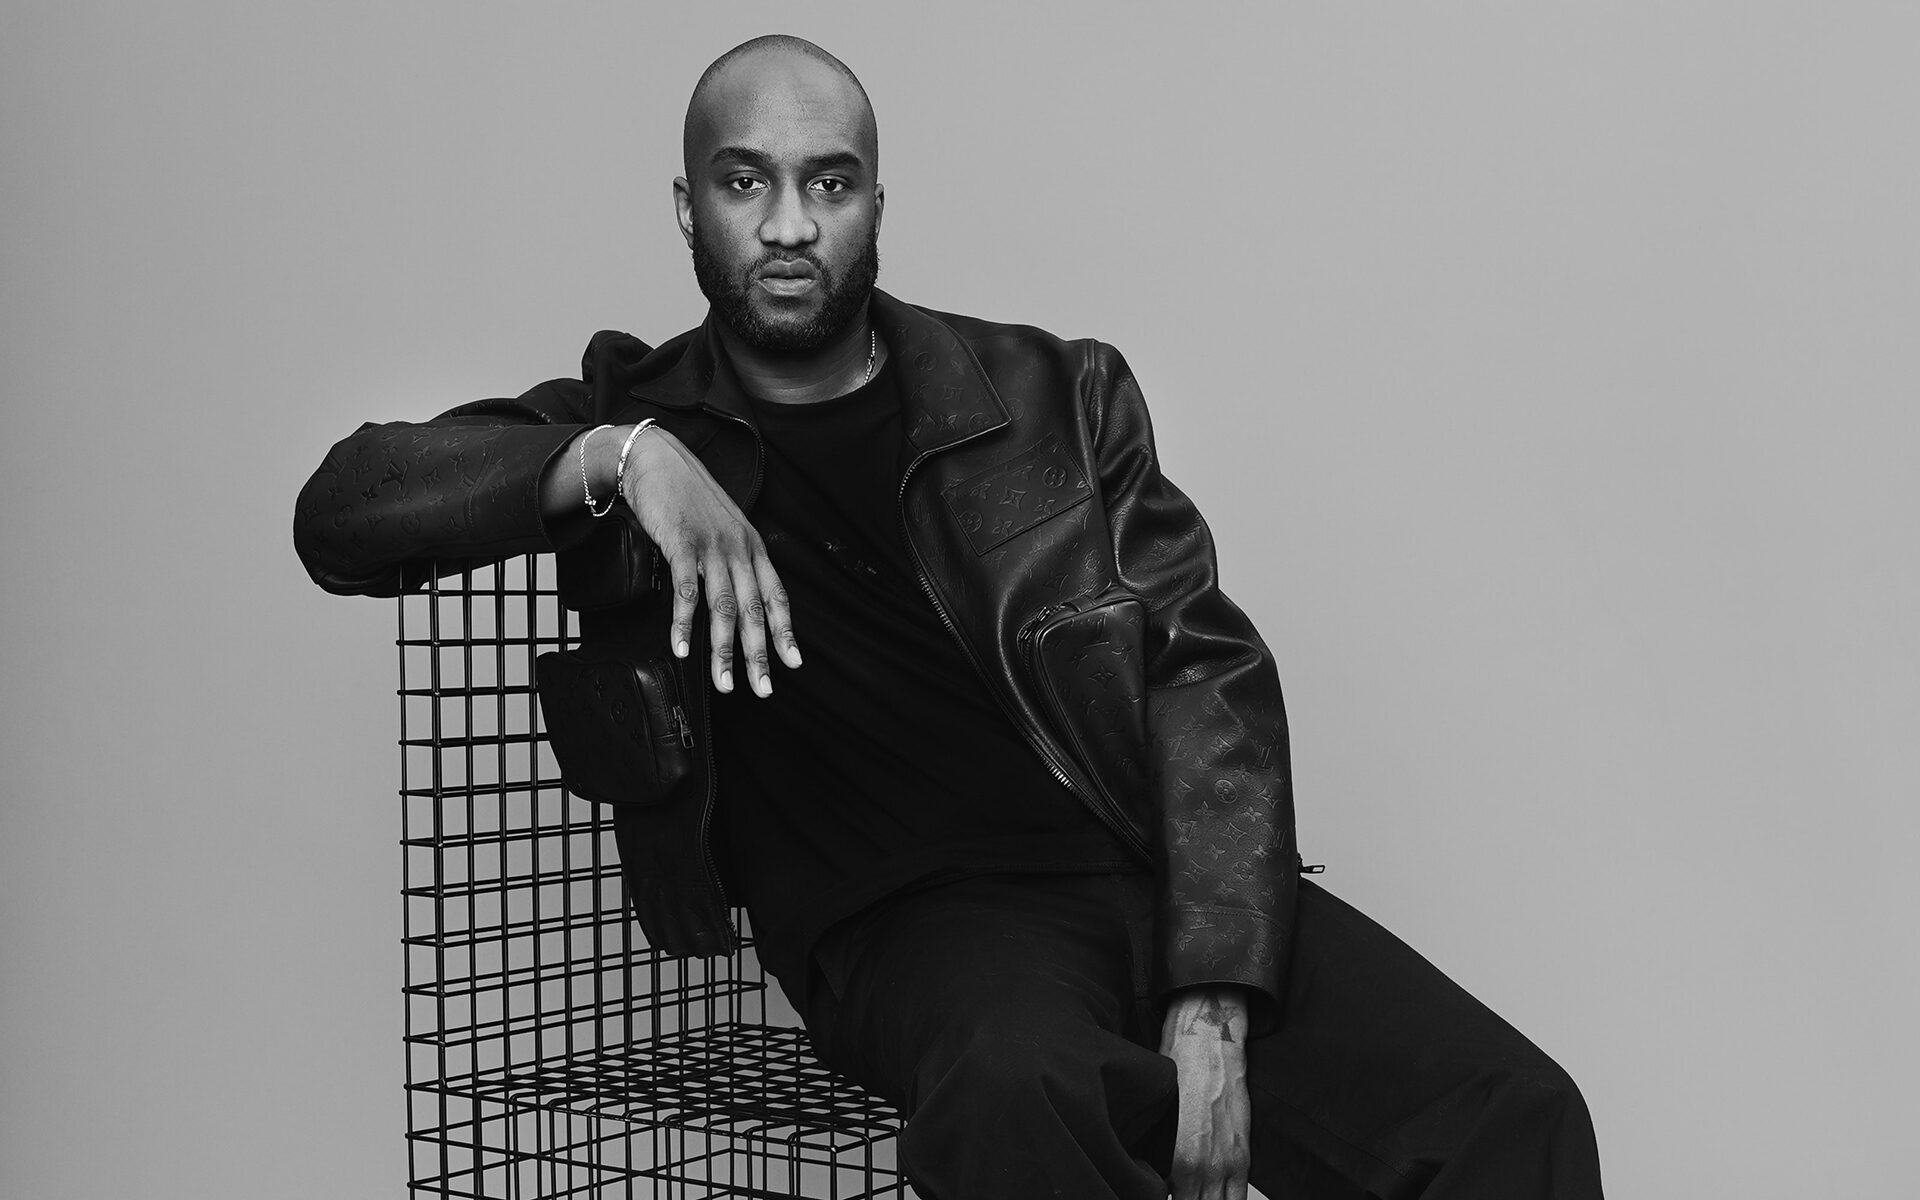 This week designers paid tribute to Off-White founder Virgil Abloh